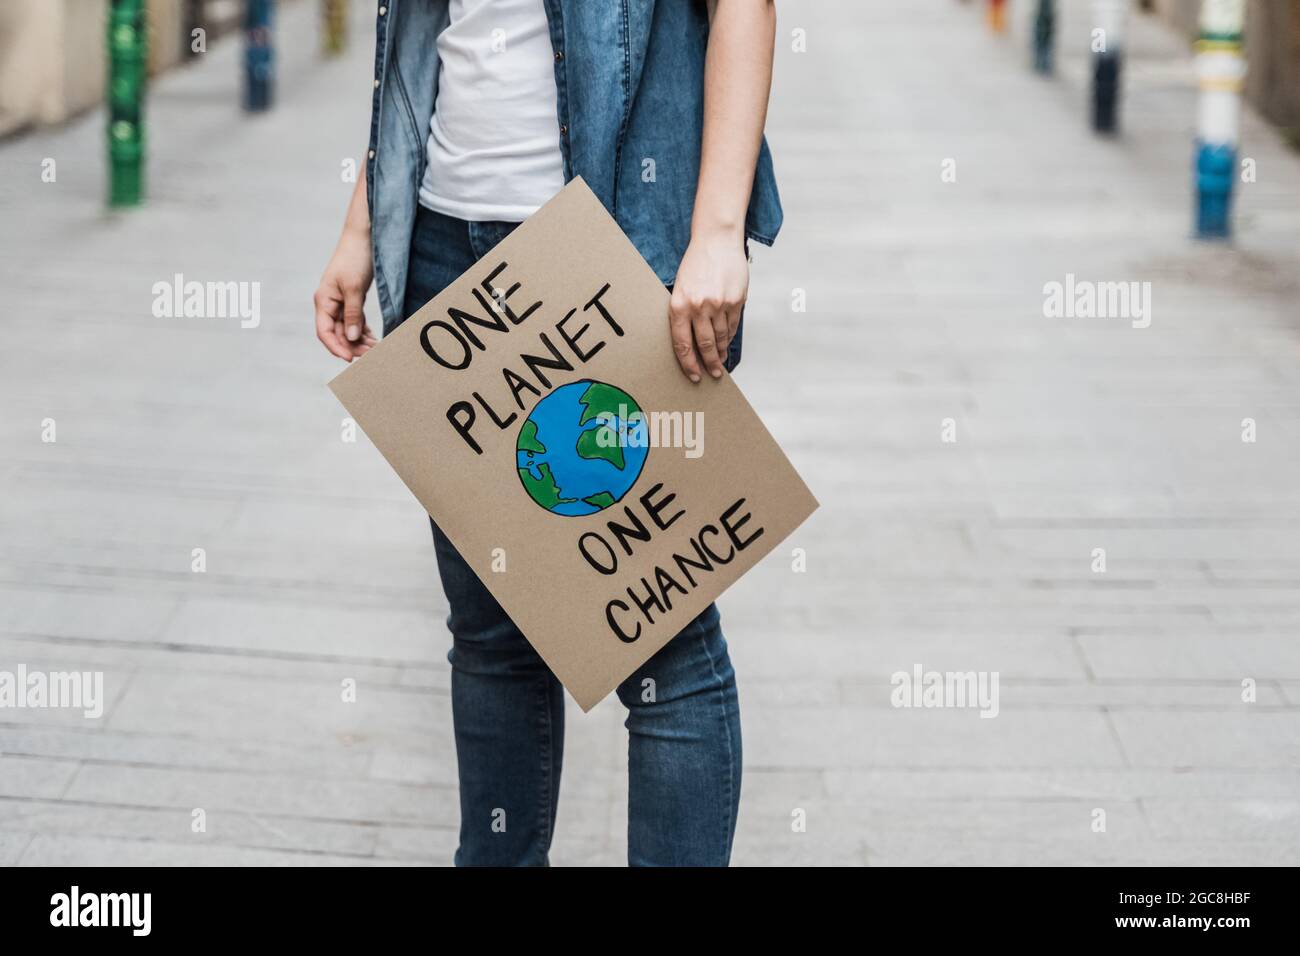 Demonstration on the city protesting against climate change and pollution - Global warming and environment concept - Focus on banner Stock Photo